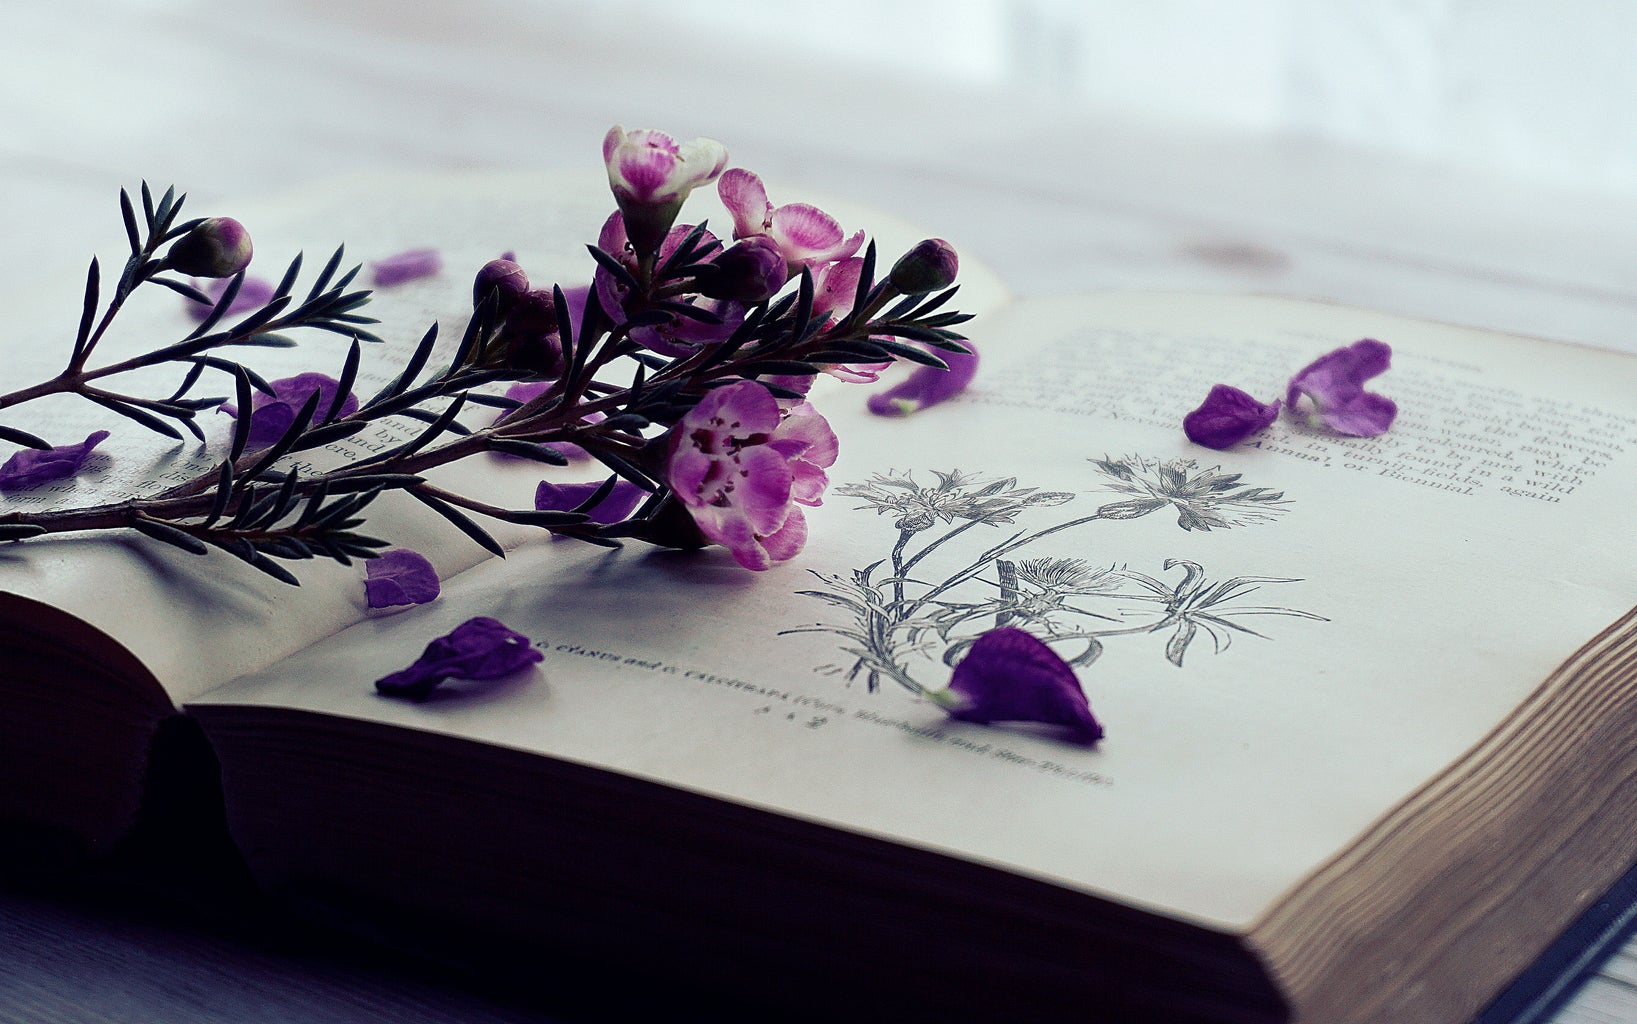 purple flowers and petals laying on open book